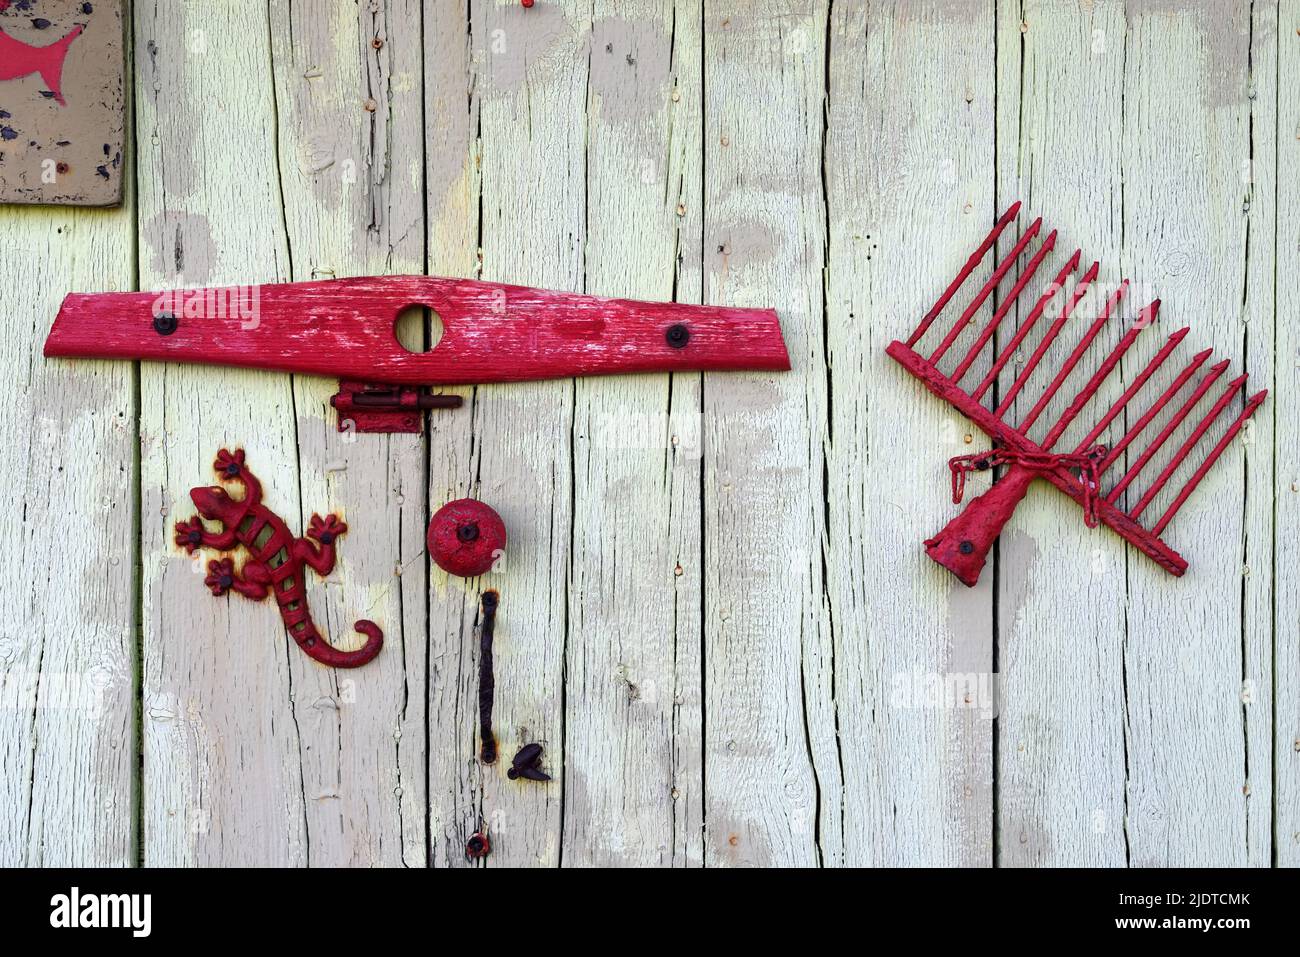 Old Shed Door Decorated with Metal Junk including Toy Metal Lizard and old Rake Head on Boat Shed on Bregancon Beach Var Provence France Stock Photo